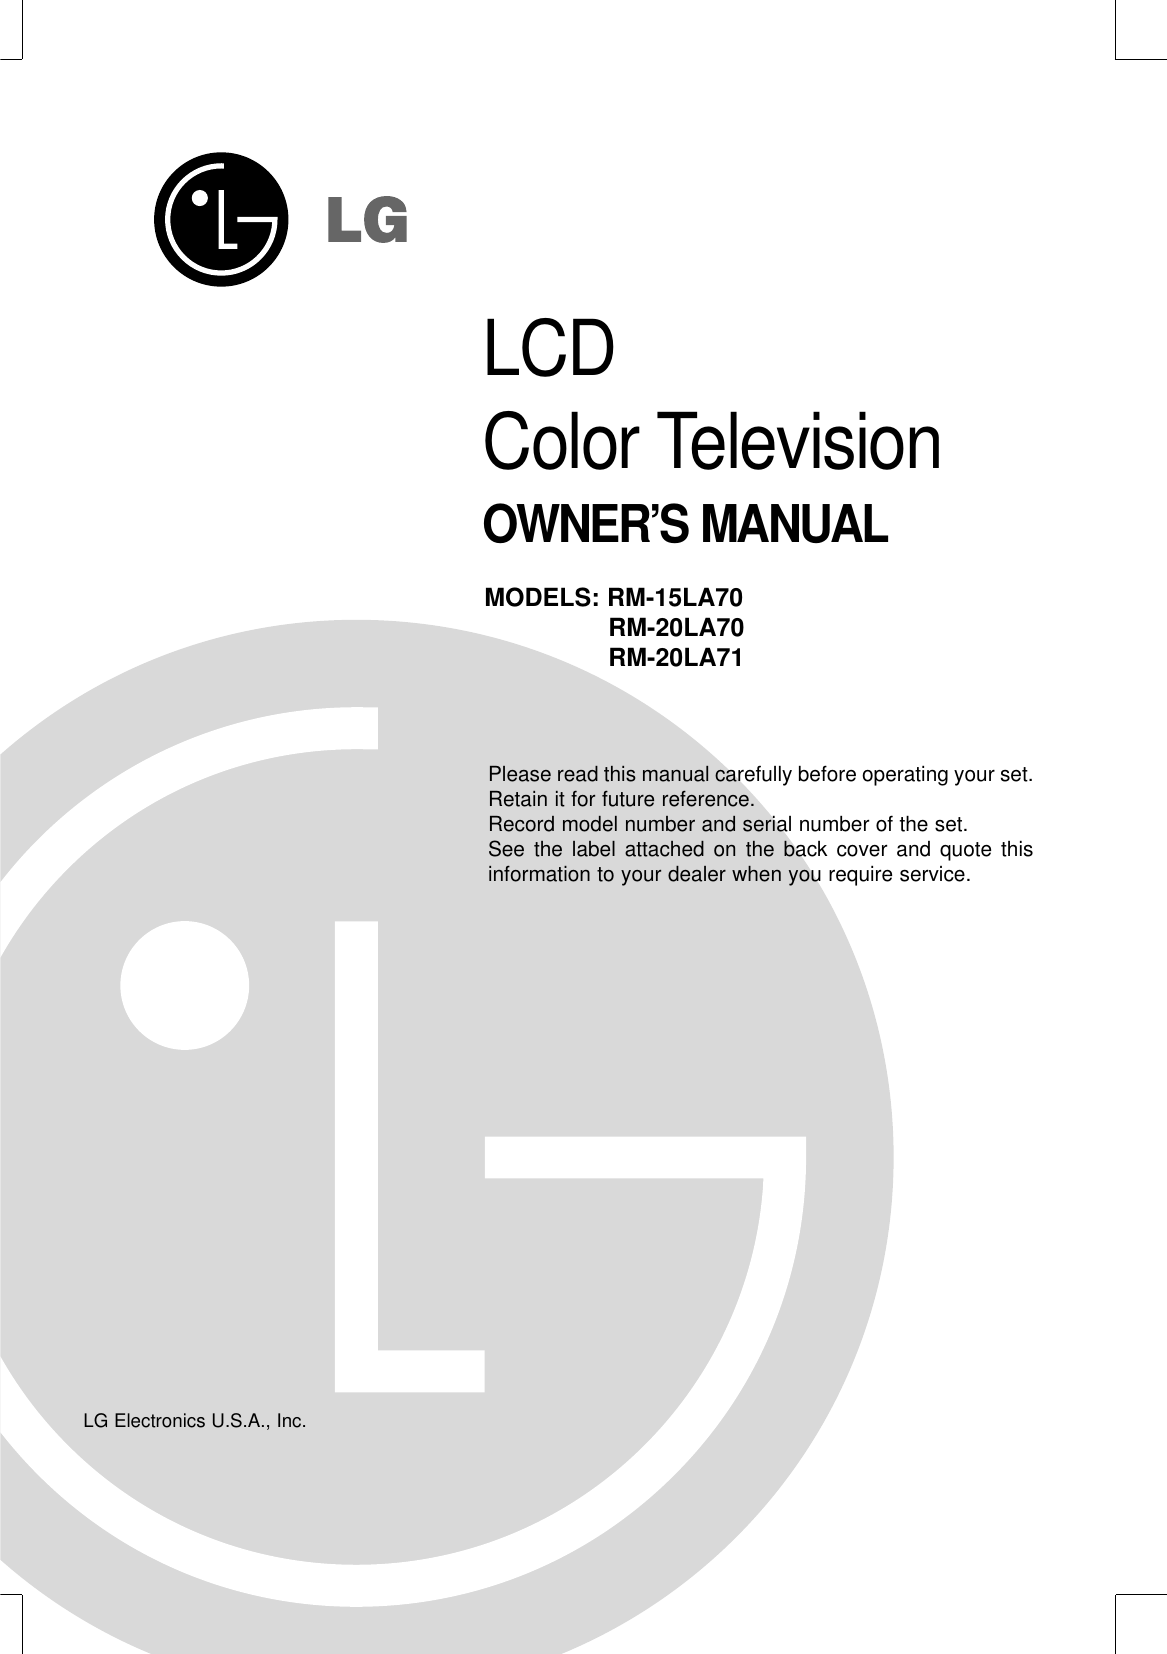 LCDColor TelevisionOWNER’S MANUALPlease read this manual carefully before operating your set. Retain it for future reference.Record model number and serial number of the set. See the label attached on the back cover and quote thisinformation to your dealer when you require service.MODELS: RM-15LA70RM-20LA70RM-20LA71LG Electronics U.S.A., Inc.